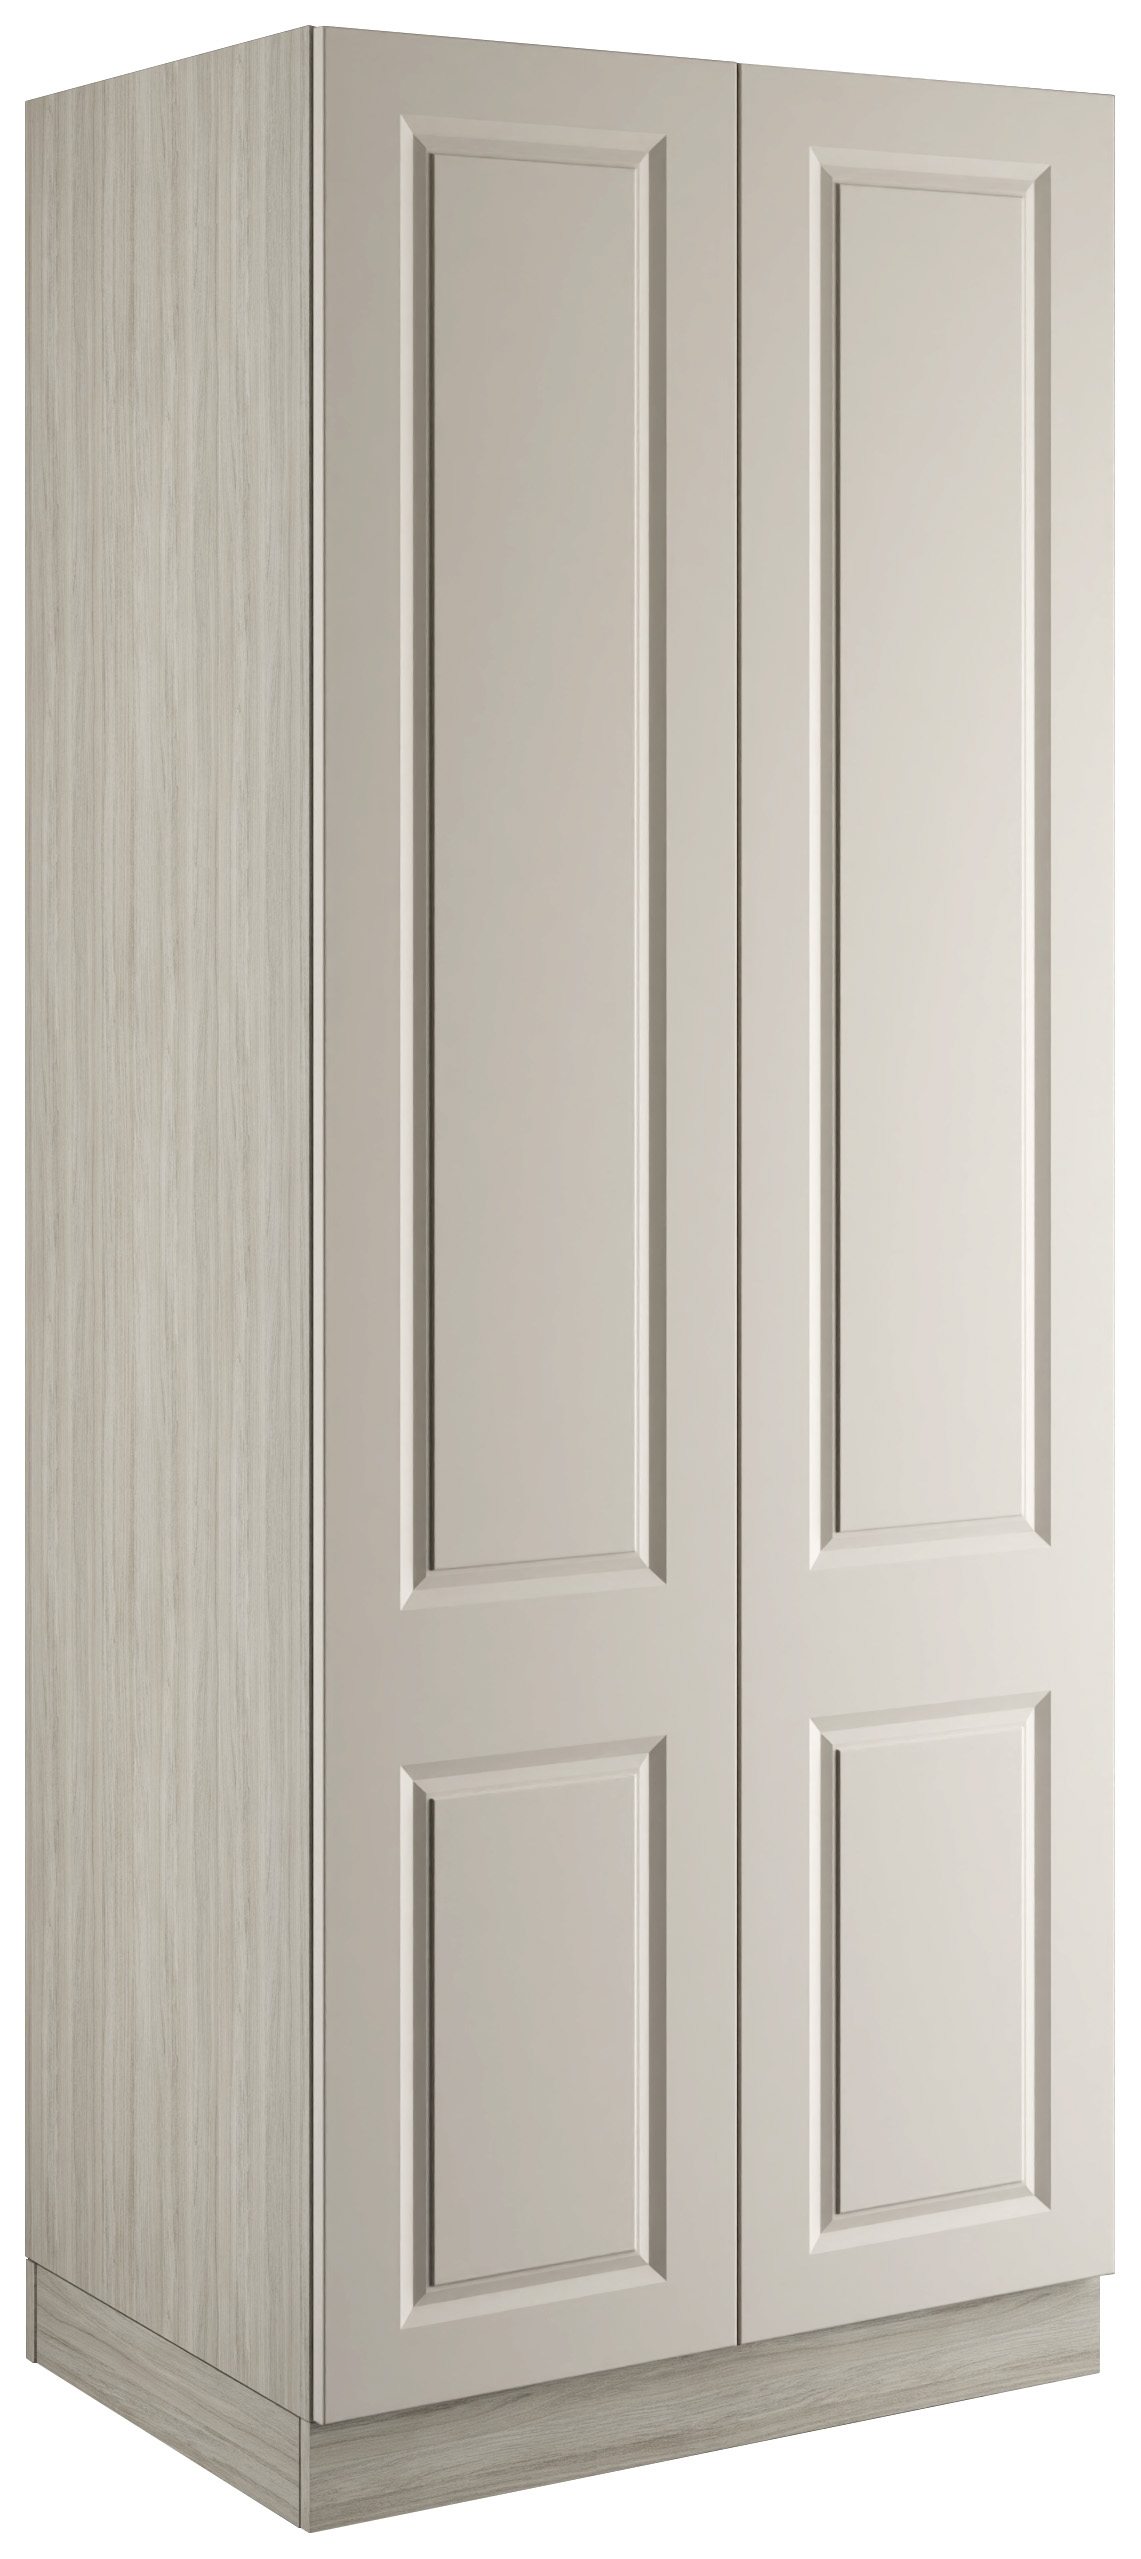 Harrogate Taupe Grey Double Wardrobe with Double Rail - 900 x 2260 x 608mm